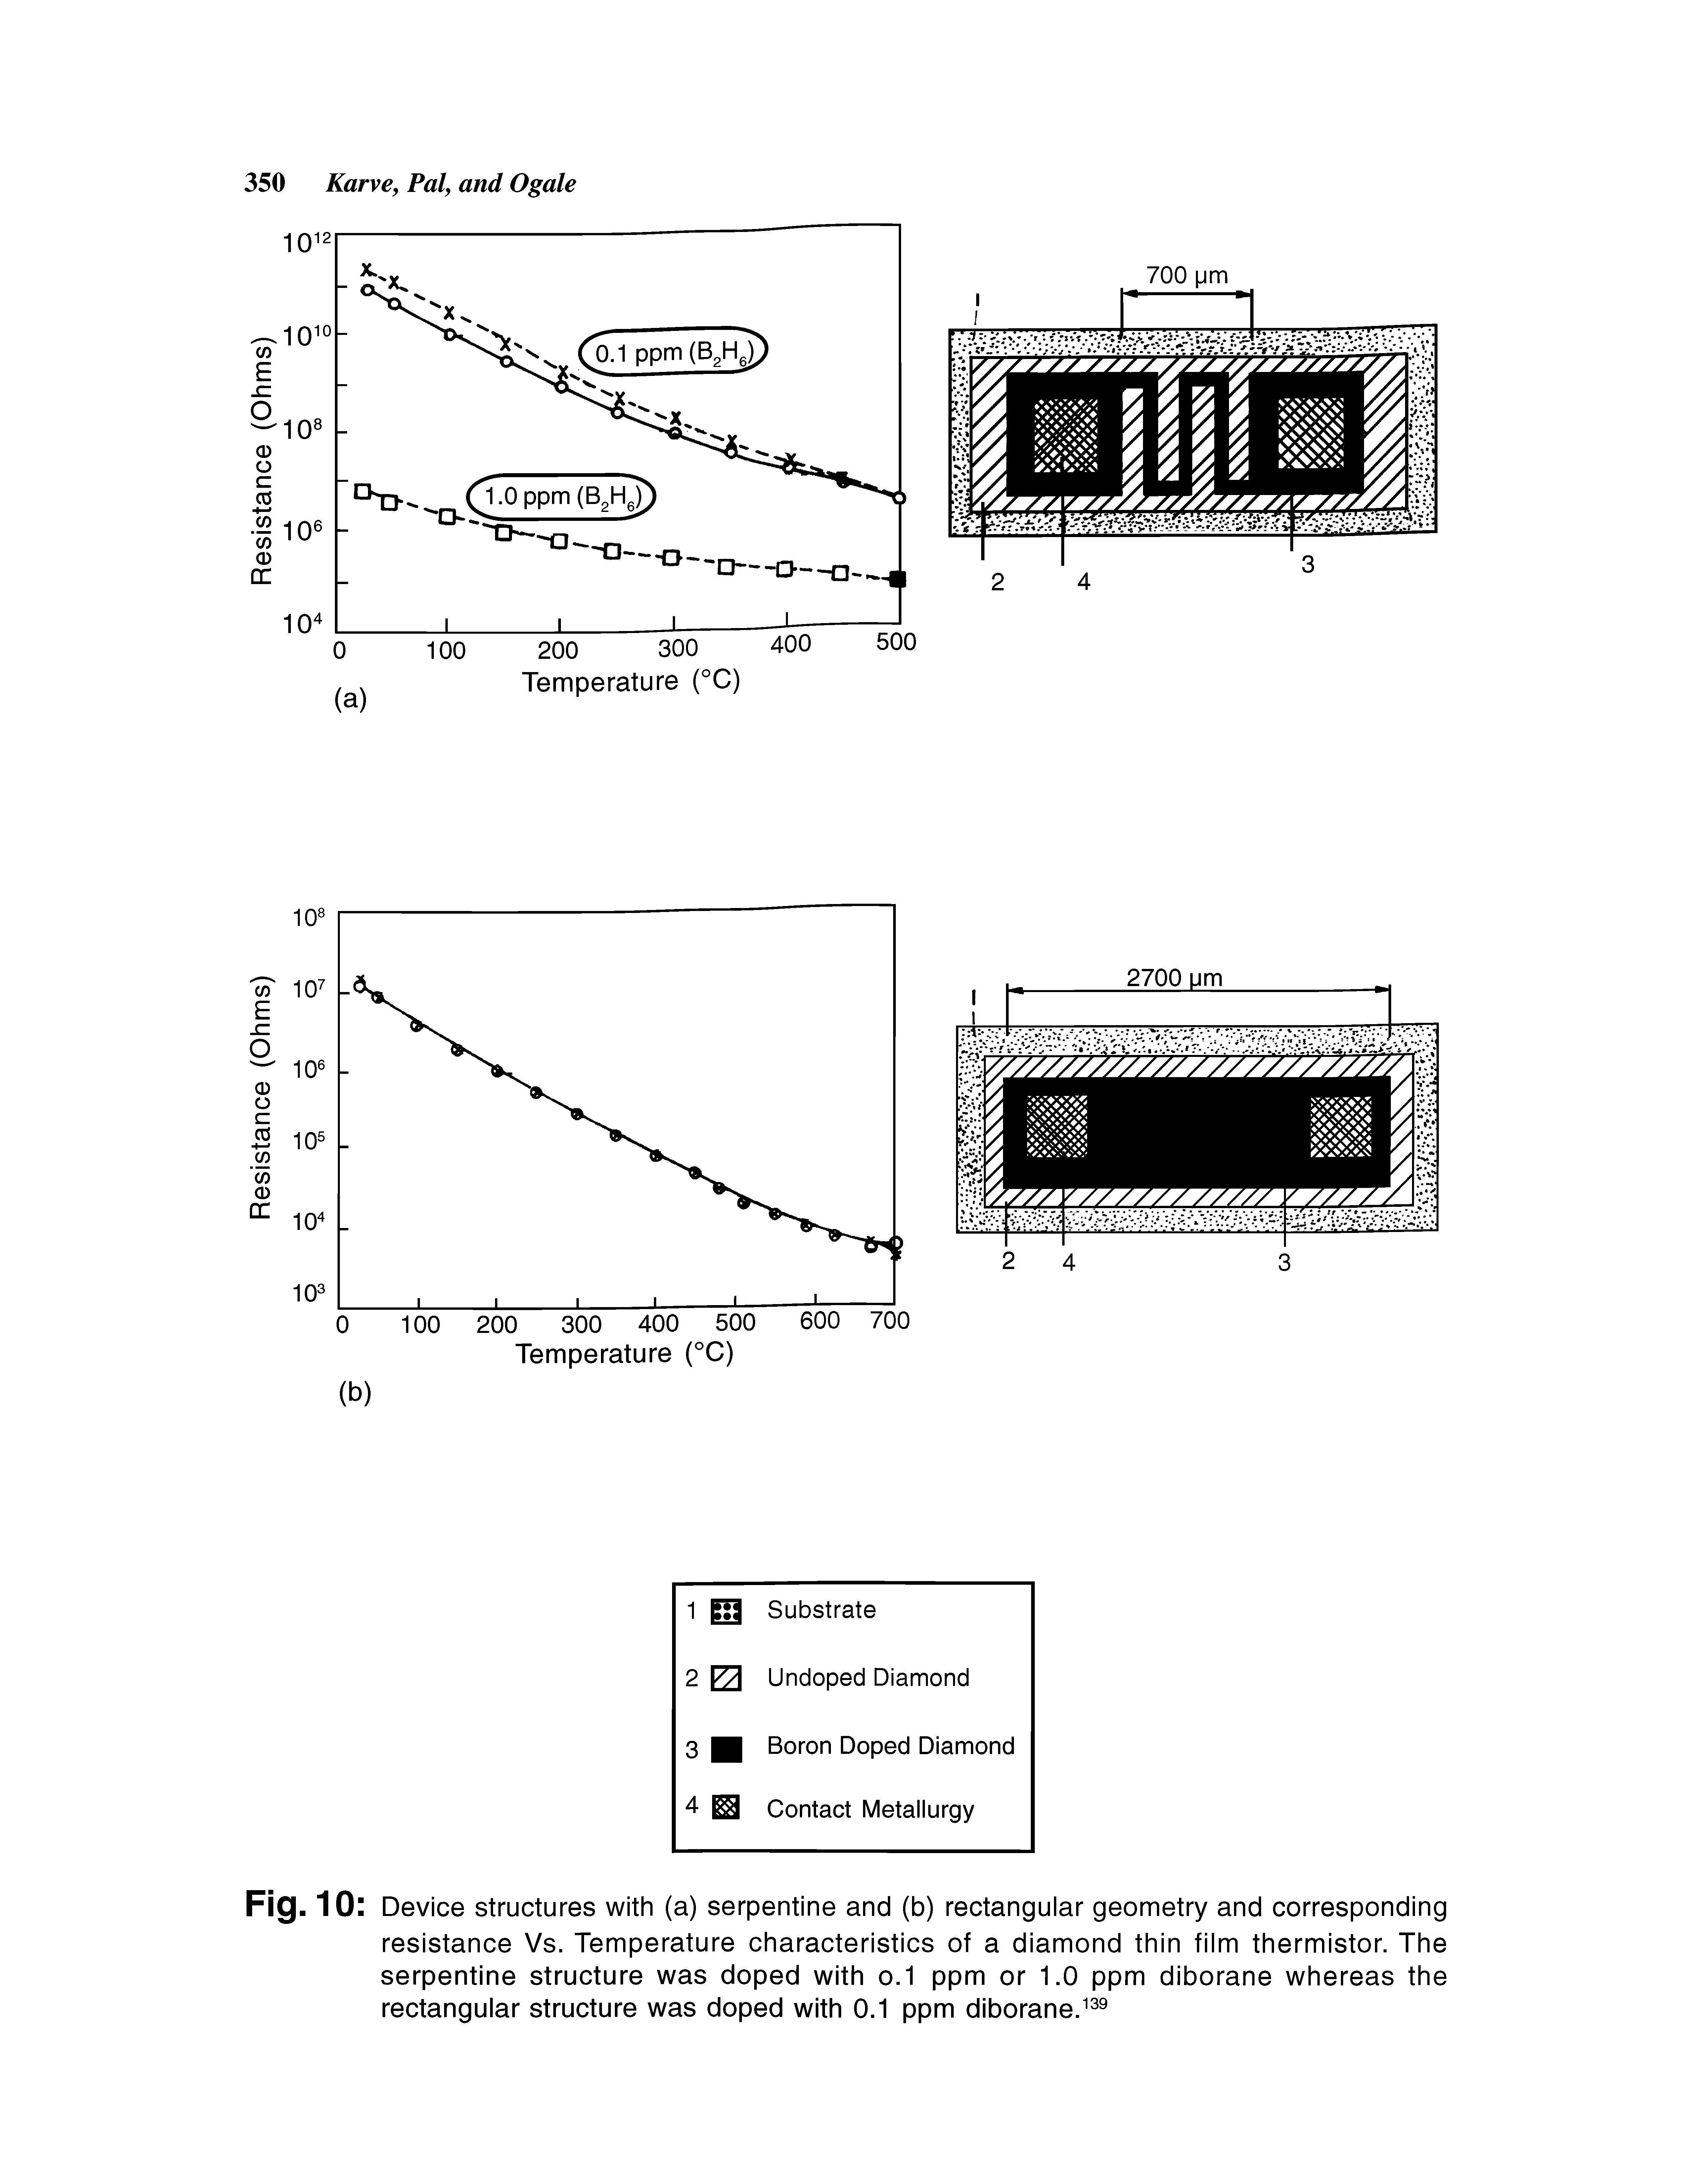 Fig. 10 Device structures with (a) serpentine and (b) rectanguiar geometry and corresponding resistance Vs. Temperature characteristics of a diamond thin fiim thermistor. The serpentine structure was doped with o.1 ppm or 1.0 ppm diborane whereas the rectanguiar structure was doped with 0.1 ppm diborane. ...